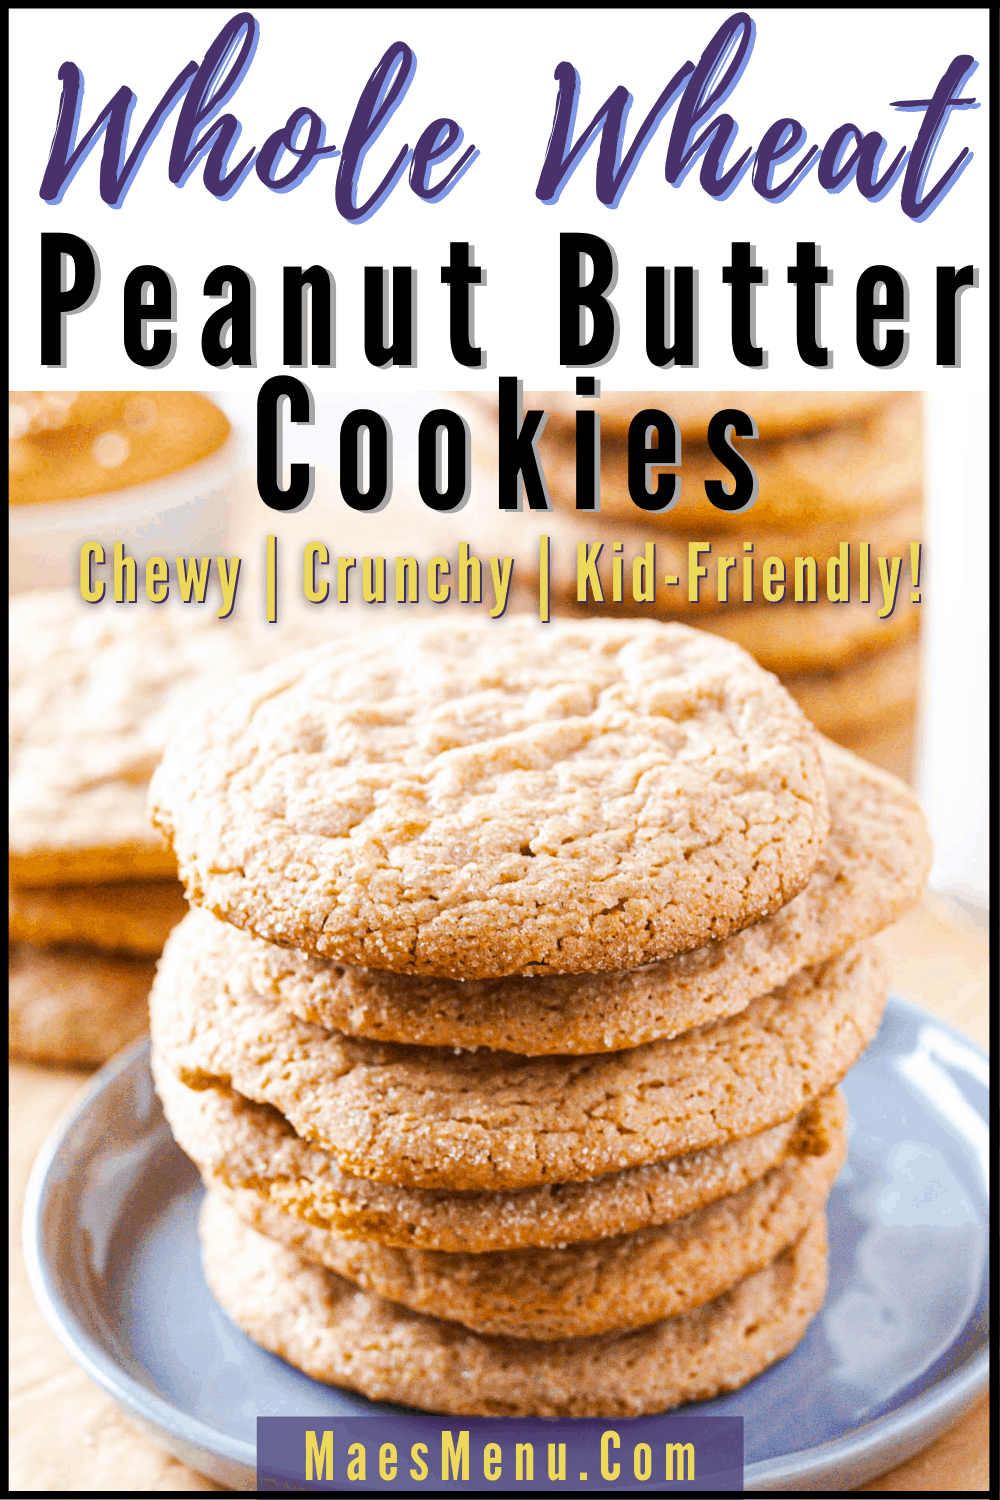 A pinterest pin for whole wheat peanut butter cookies with a tall stack of the cookies on a smoky blue plate